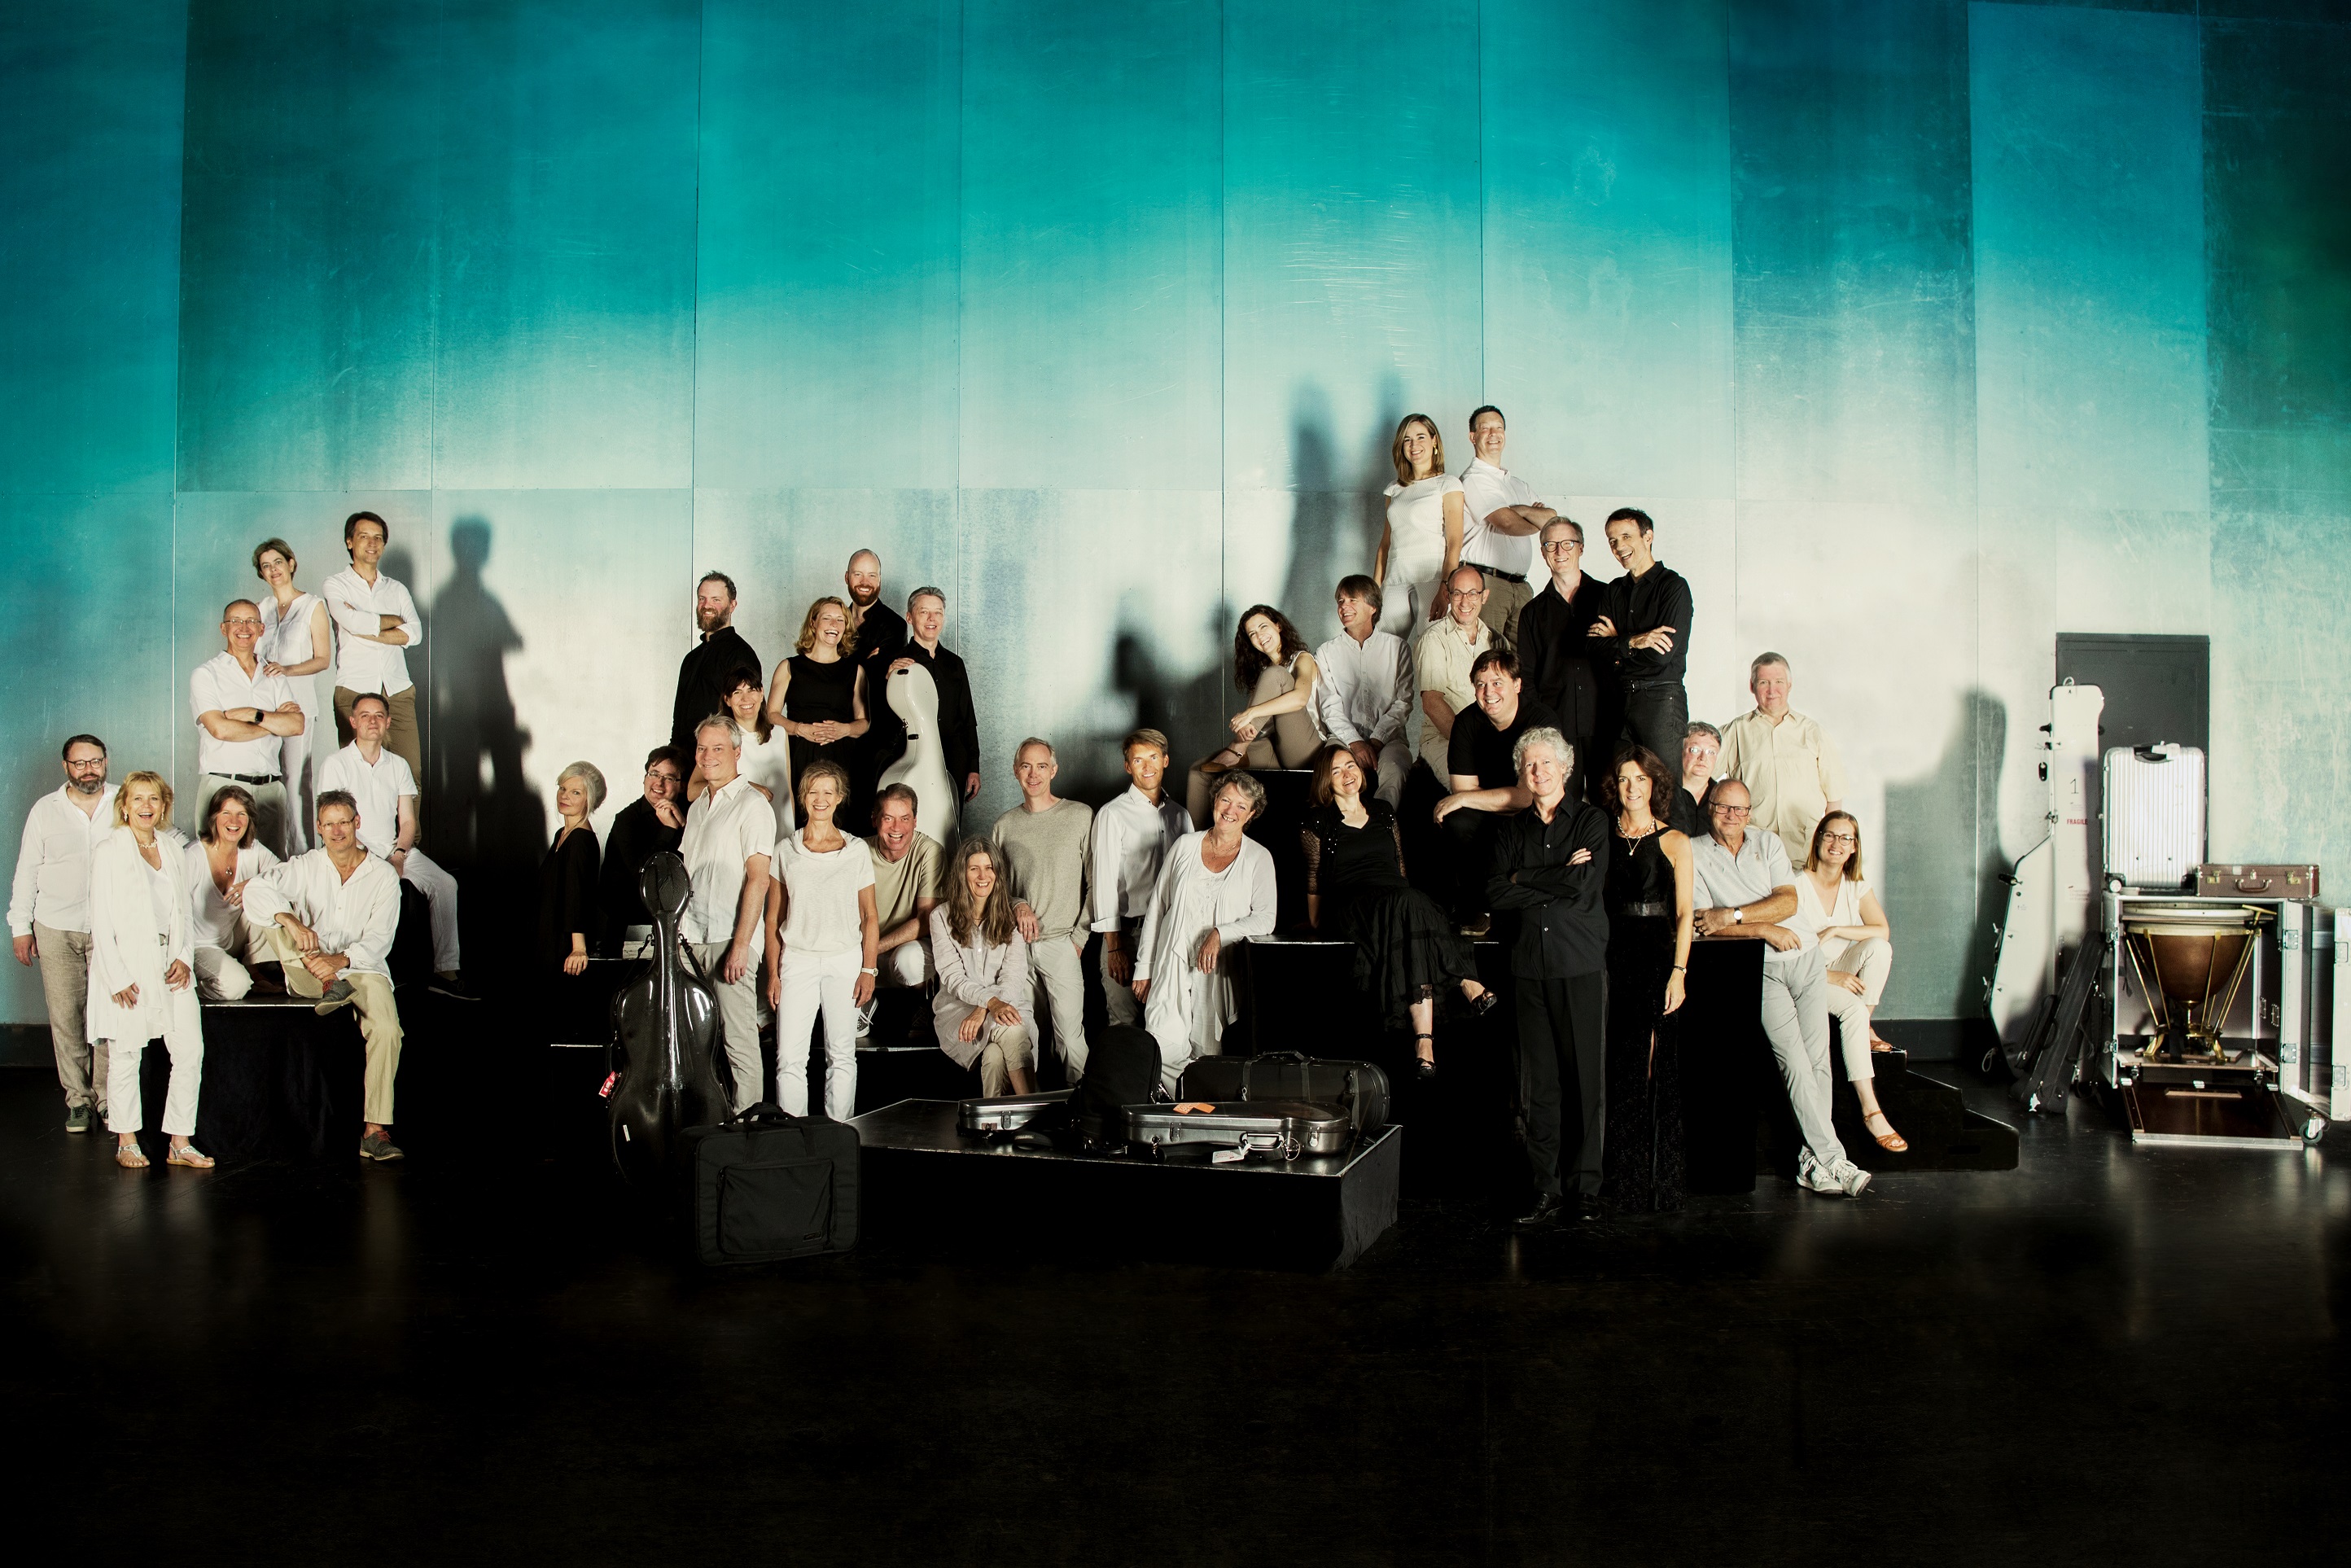 Chamber Orchestra of Europe (Fotocredit: CJuliaWesely)